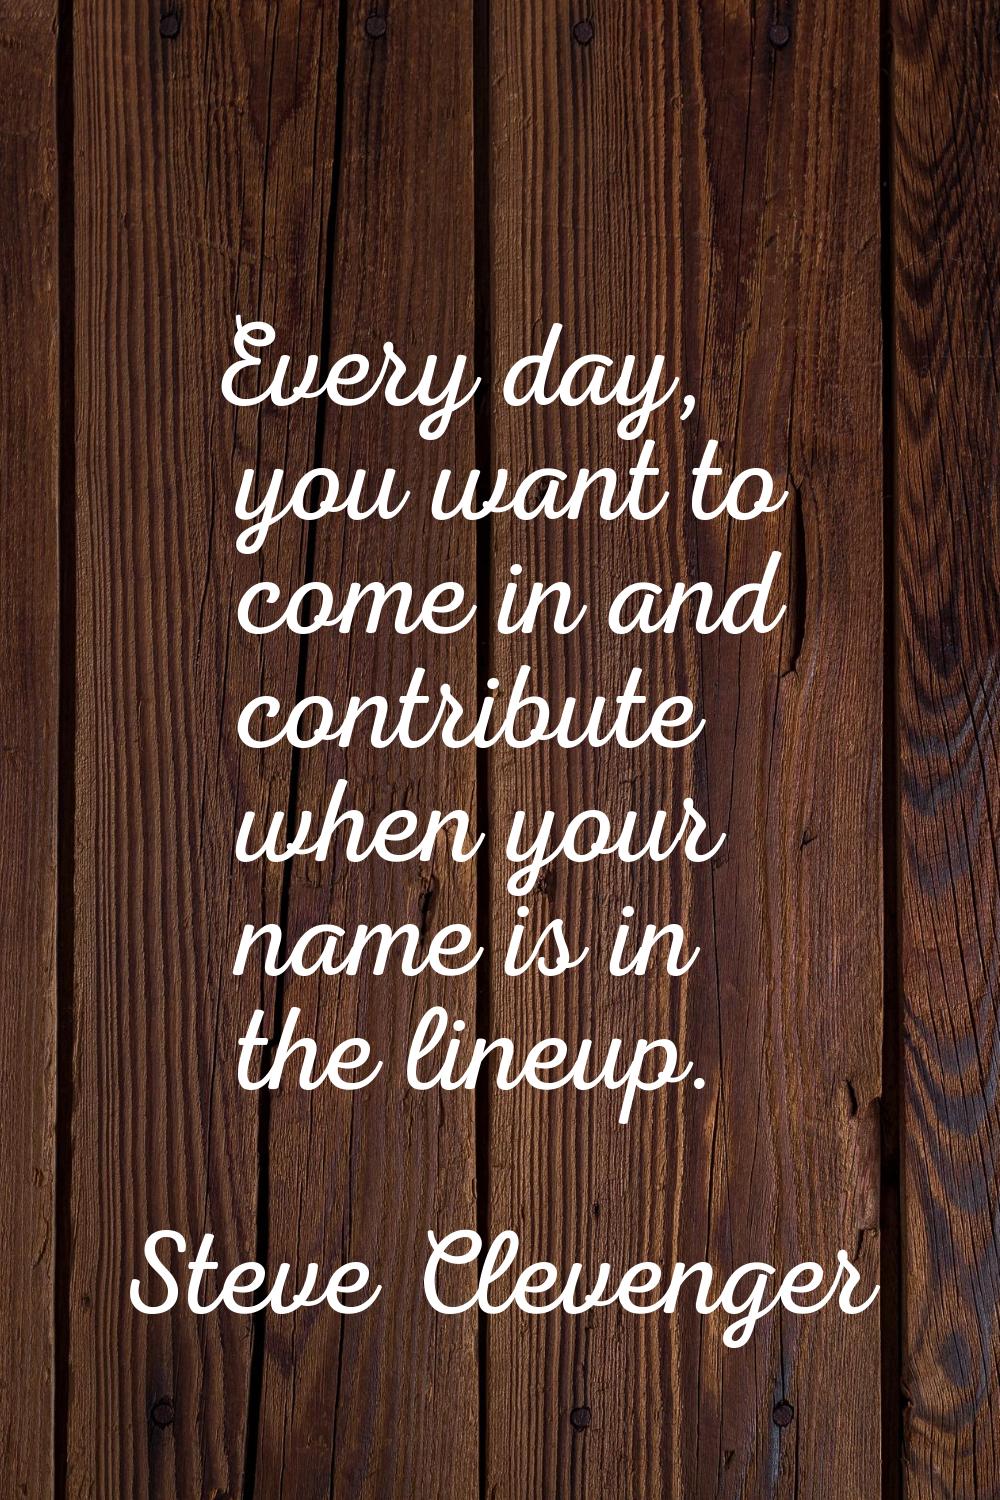 Every day, you want to come in and contribute when your name is in the lineup.